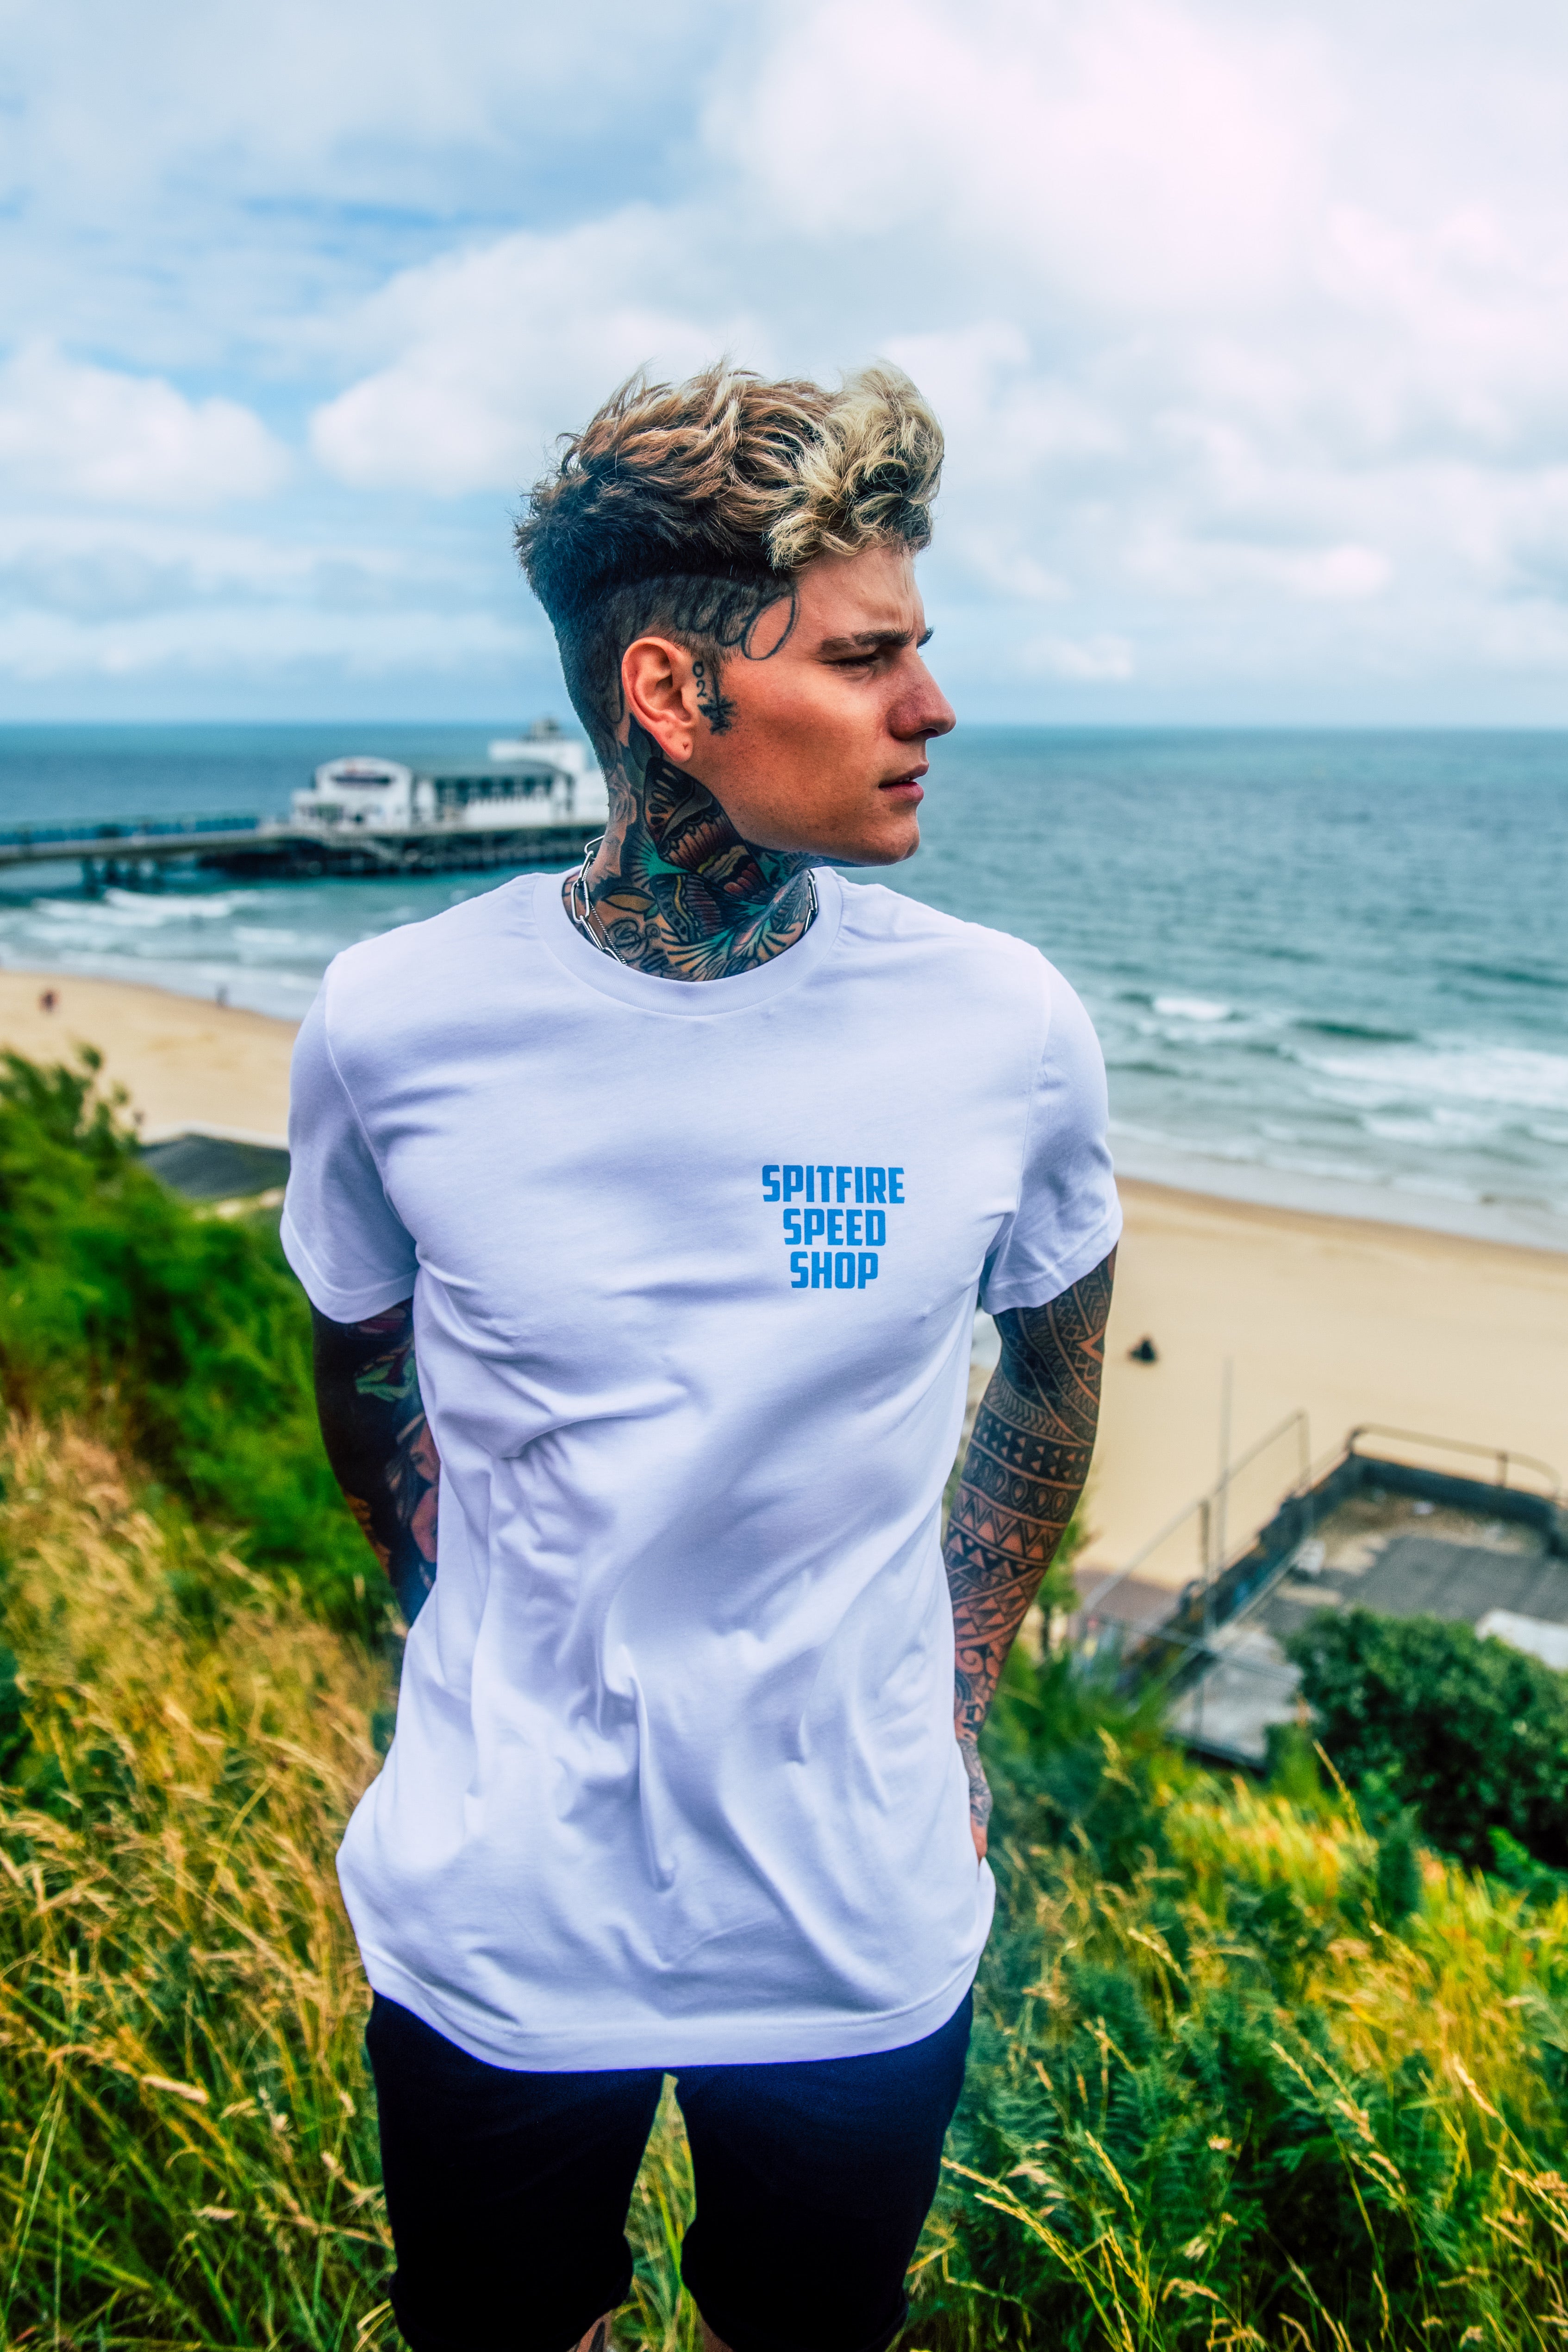 Spitfire White T-Shirt With Riding Waves Logo